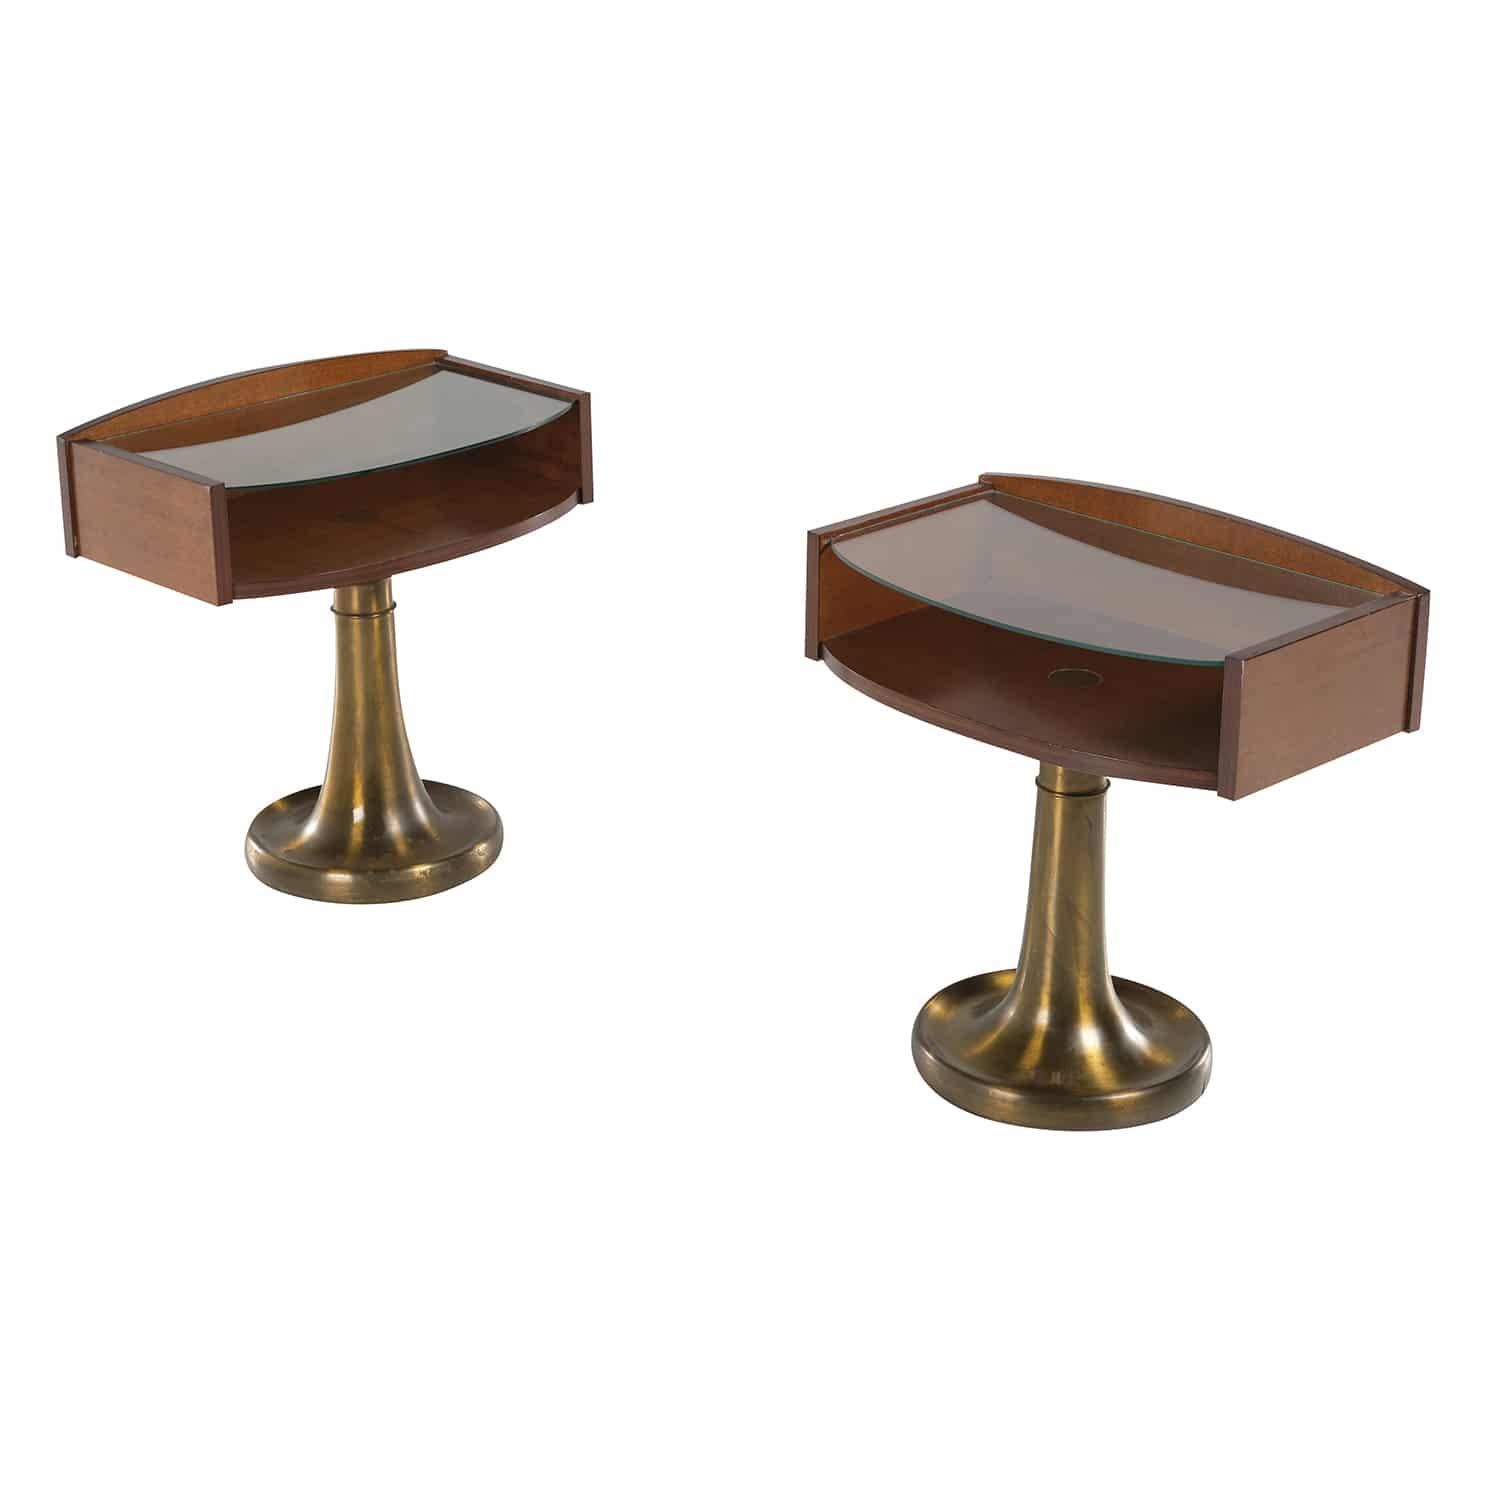 A dark-brown, vintage Mid-Century modern Italian pair of nightstands made of hand crafted polished Walnut, in good condition. The bedside tables are composed with a clear glass top, supported by a sculptural brass, bronze leg, standing on a round